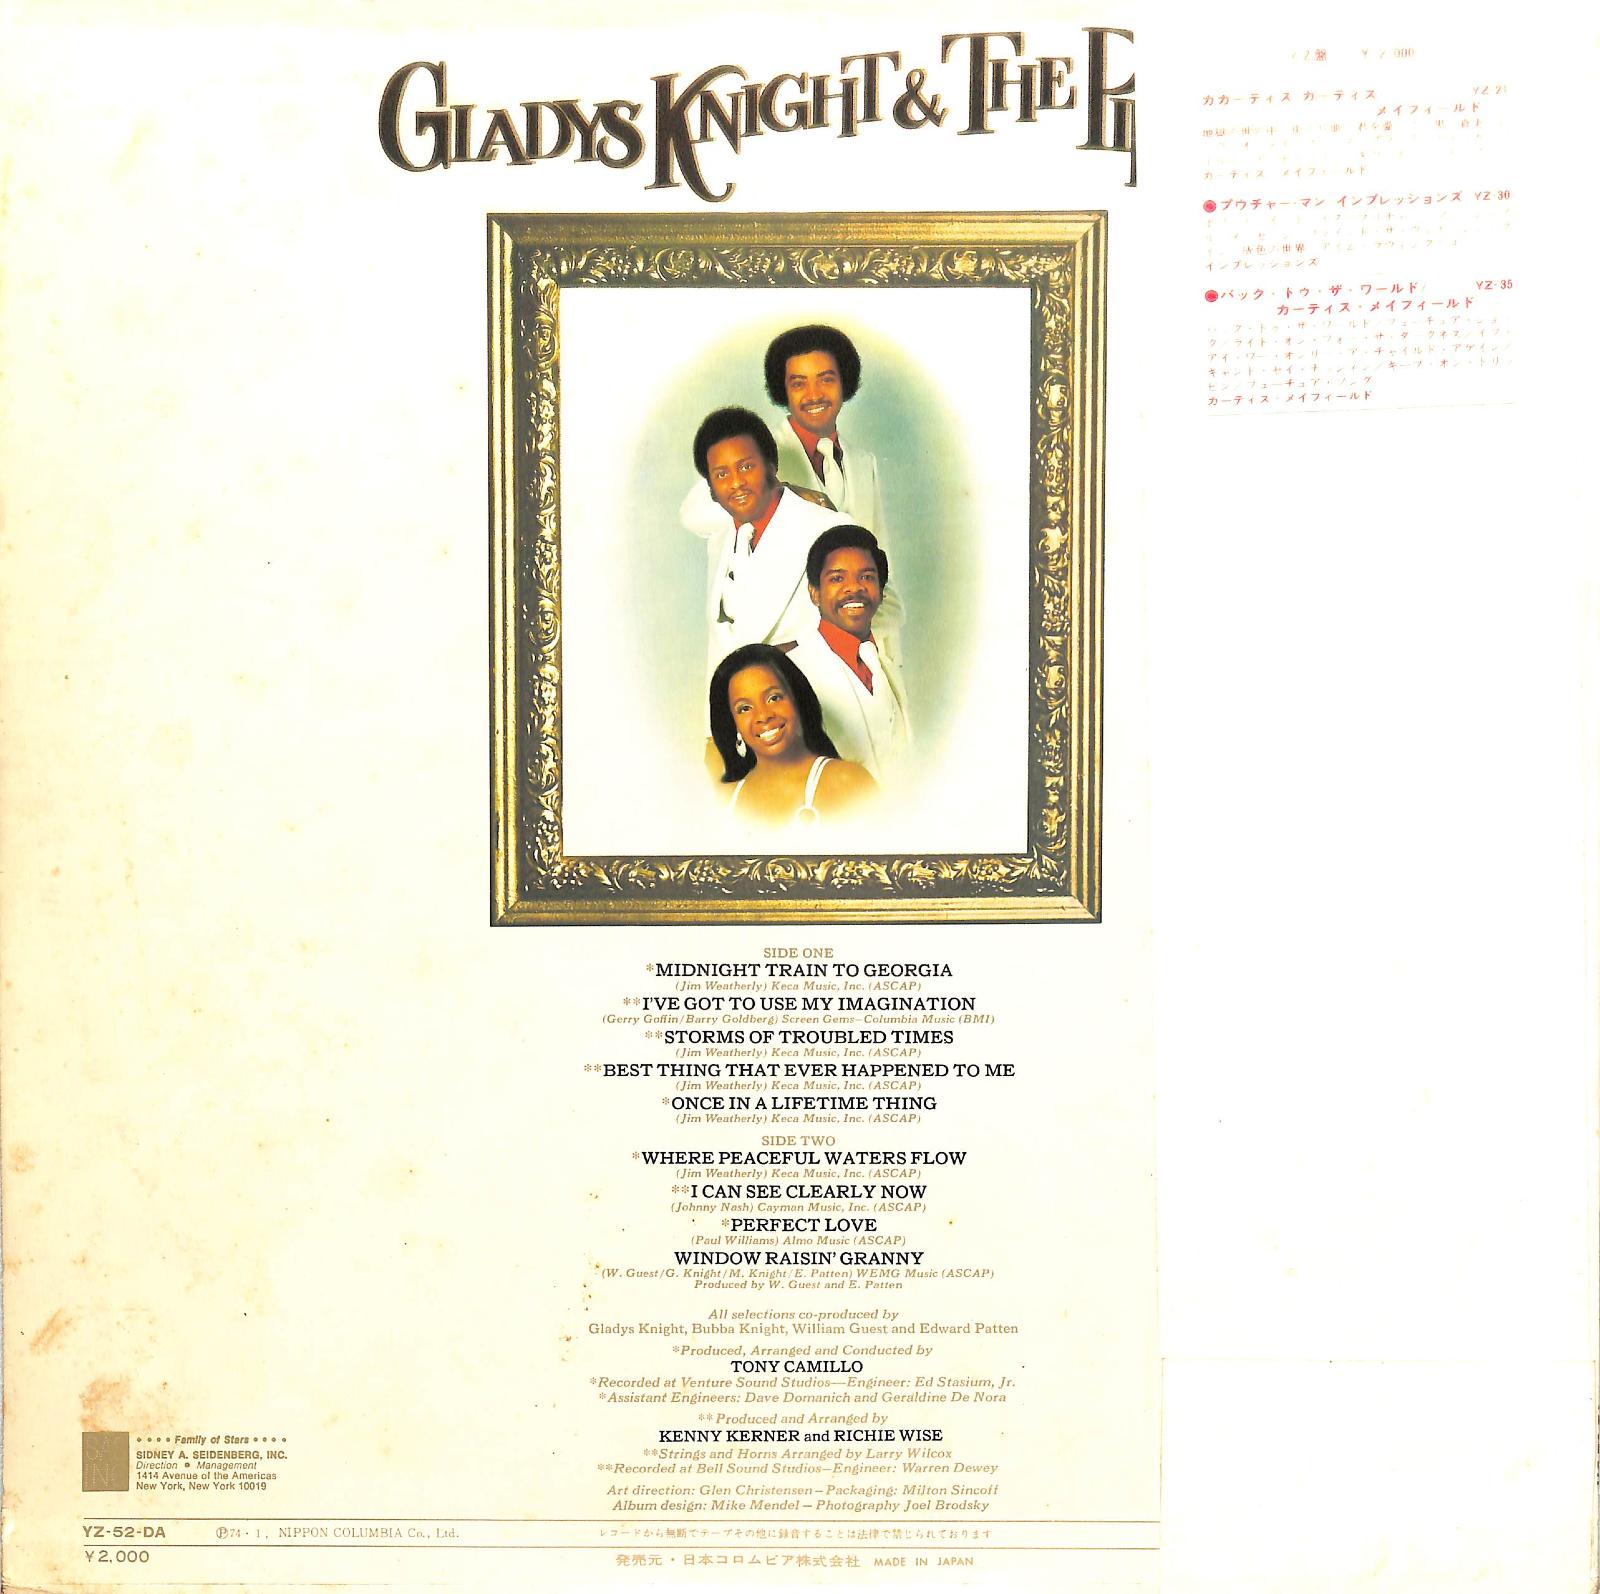 GLADYS KNIGHT & THE PIPS - Imagination